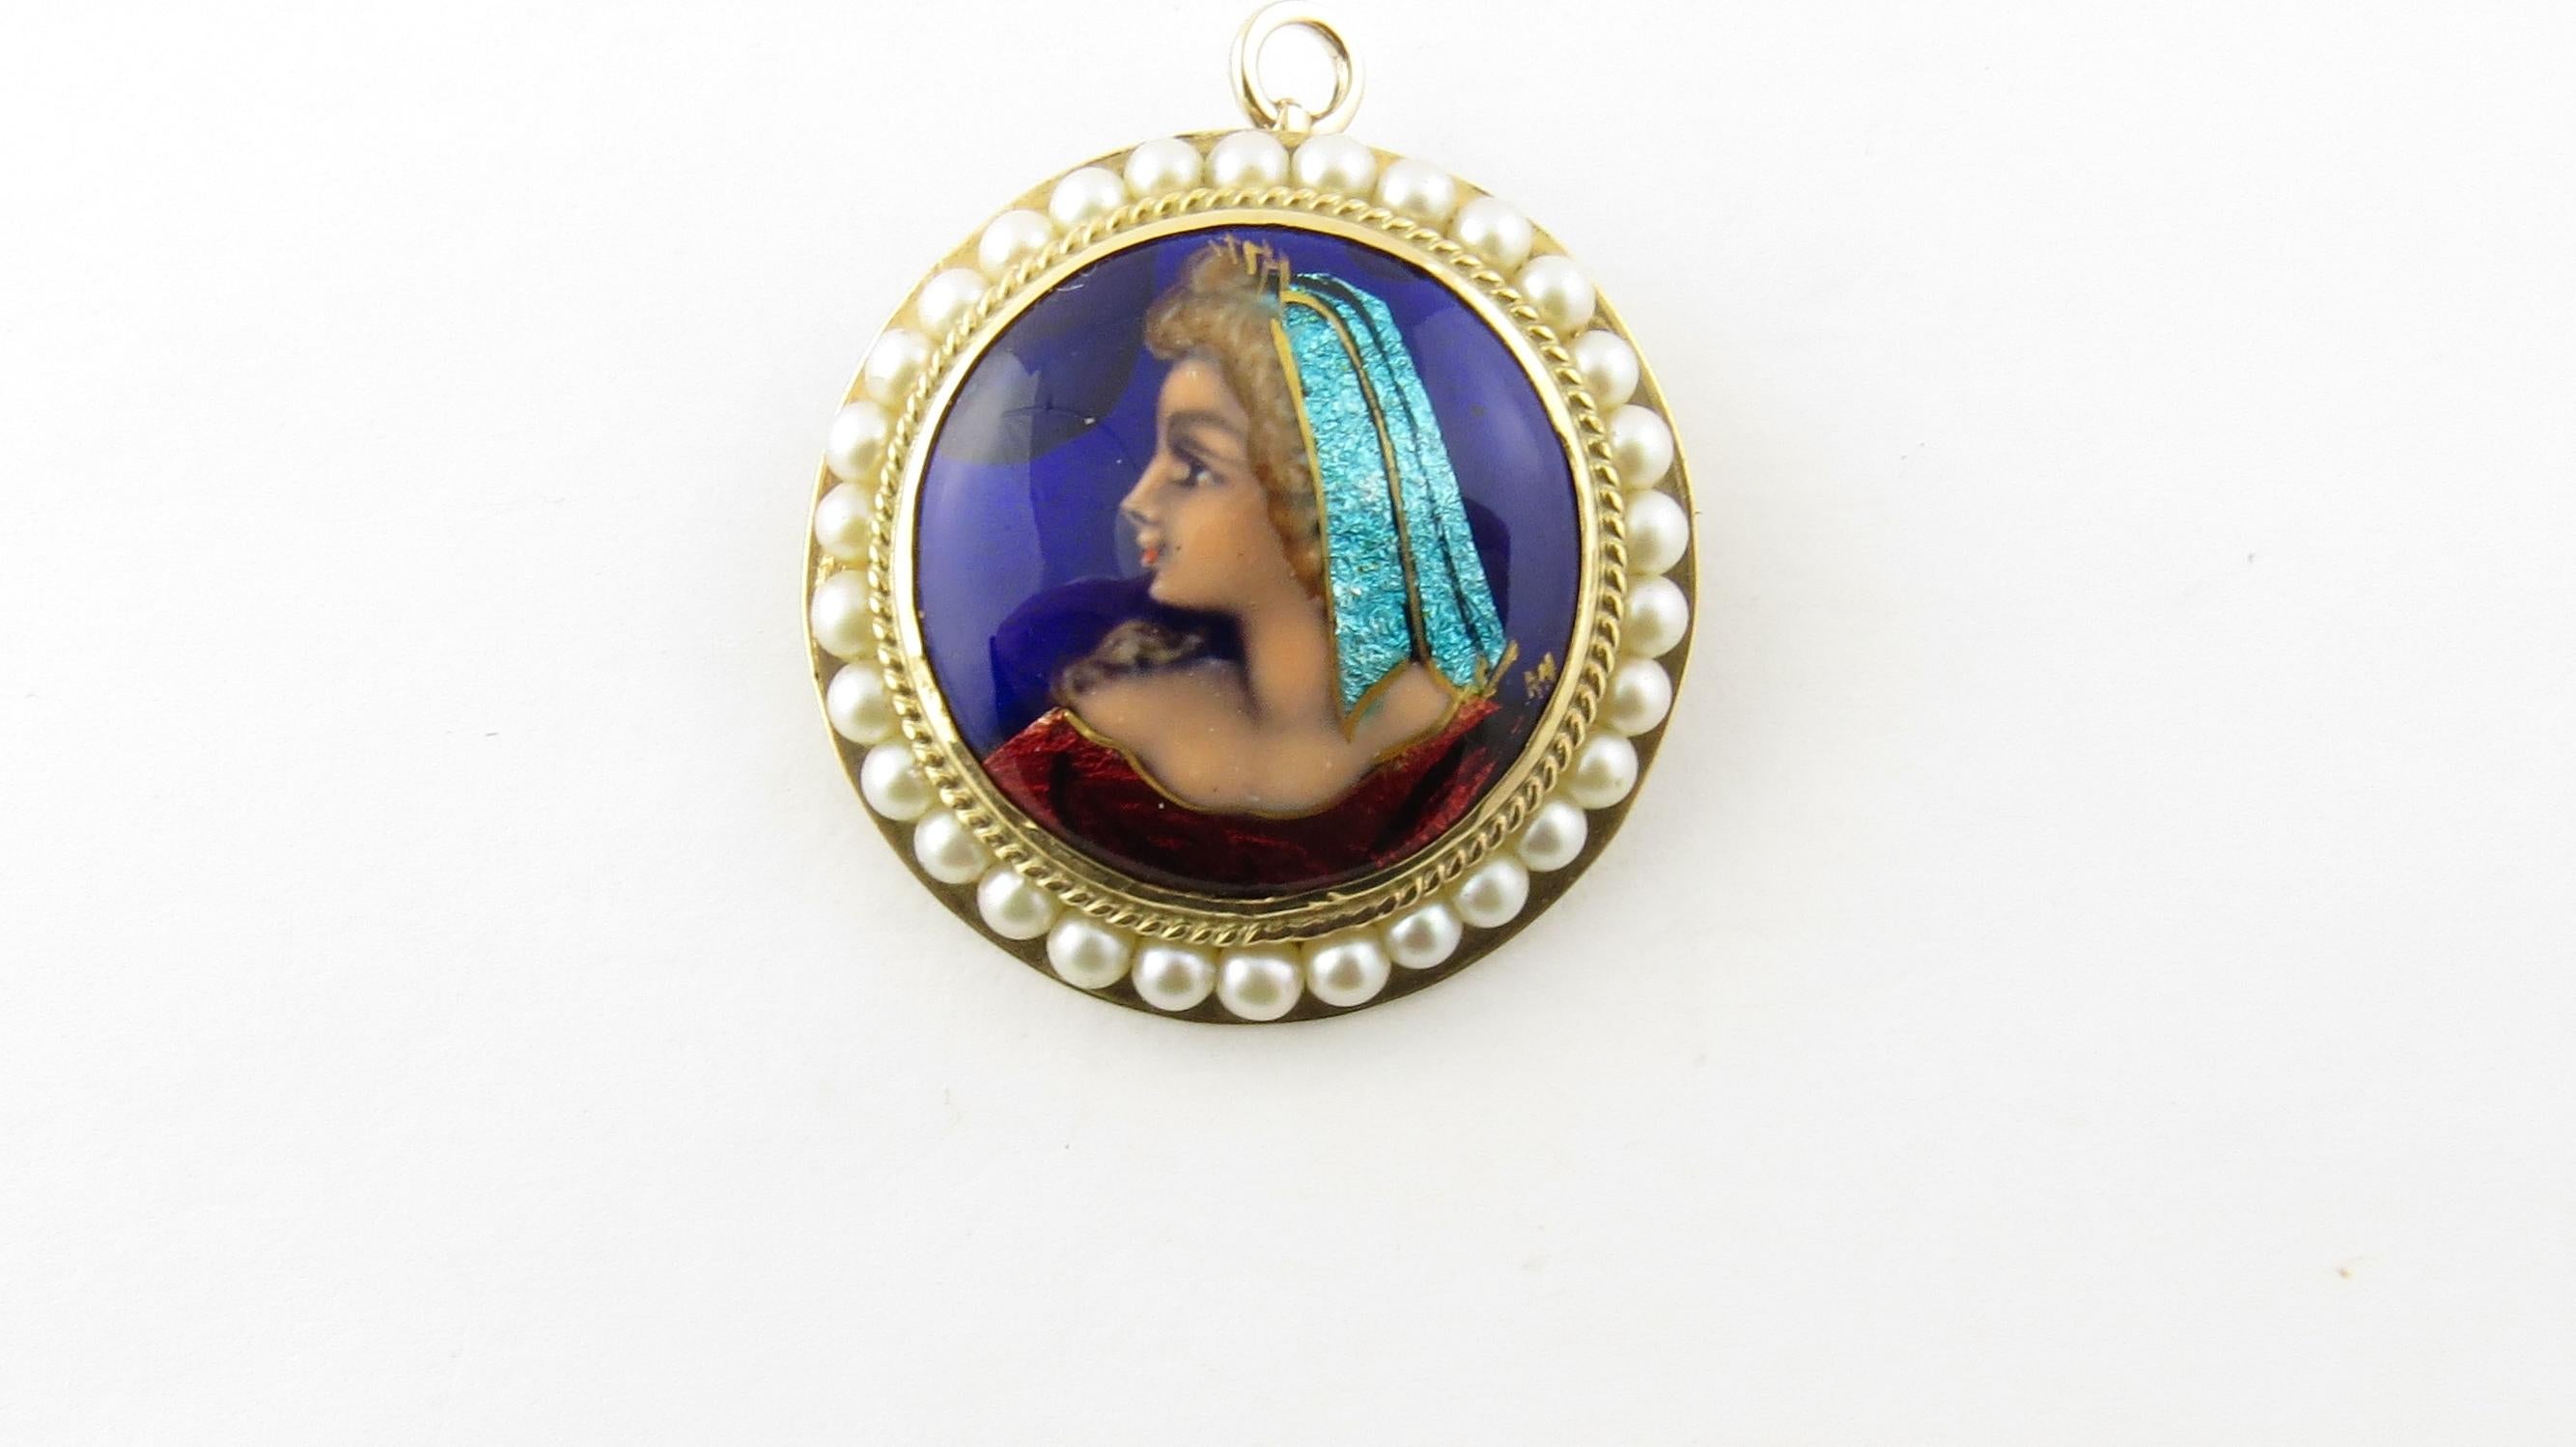 Vintage 14 Karat Yellow Gold and Seed Pearl Painted Cameo Pendant / Brooch #4384 1